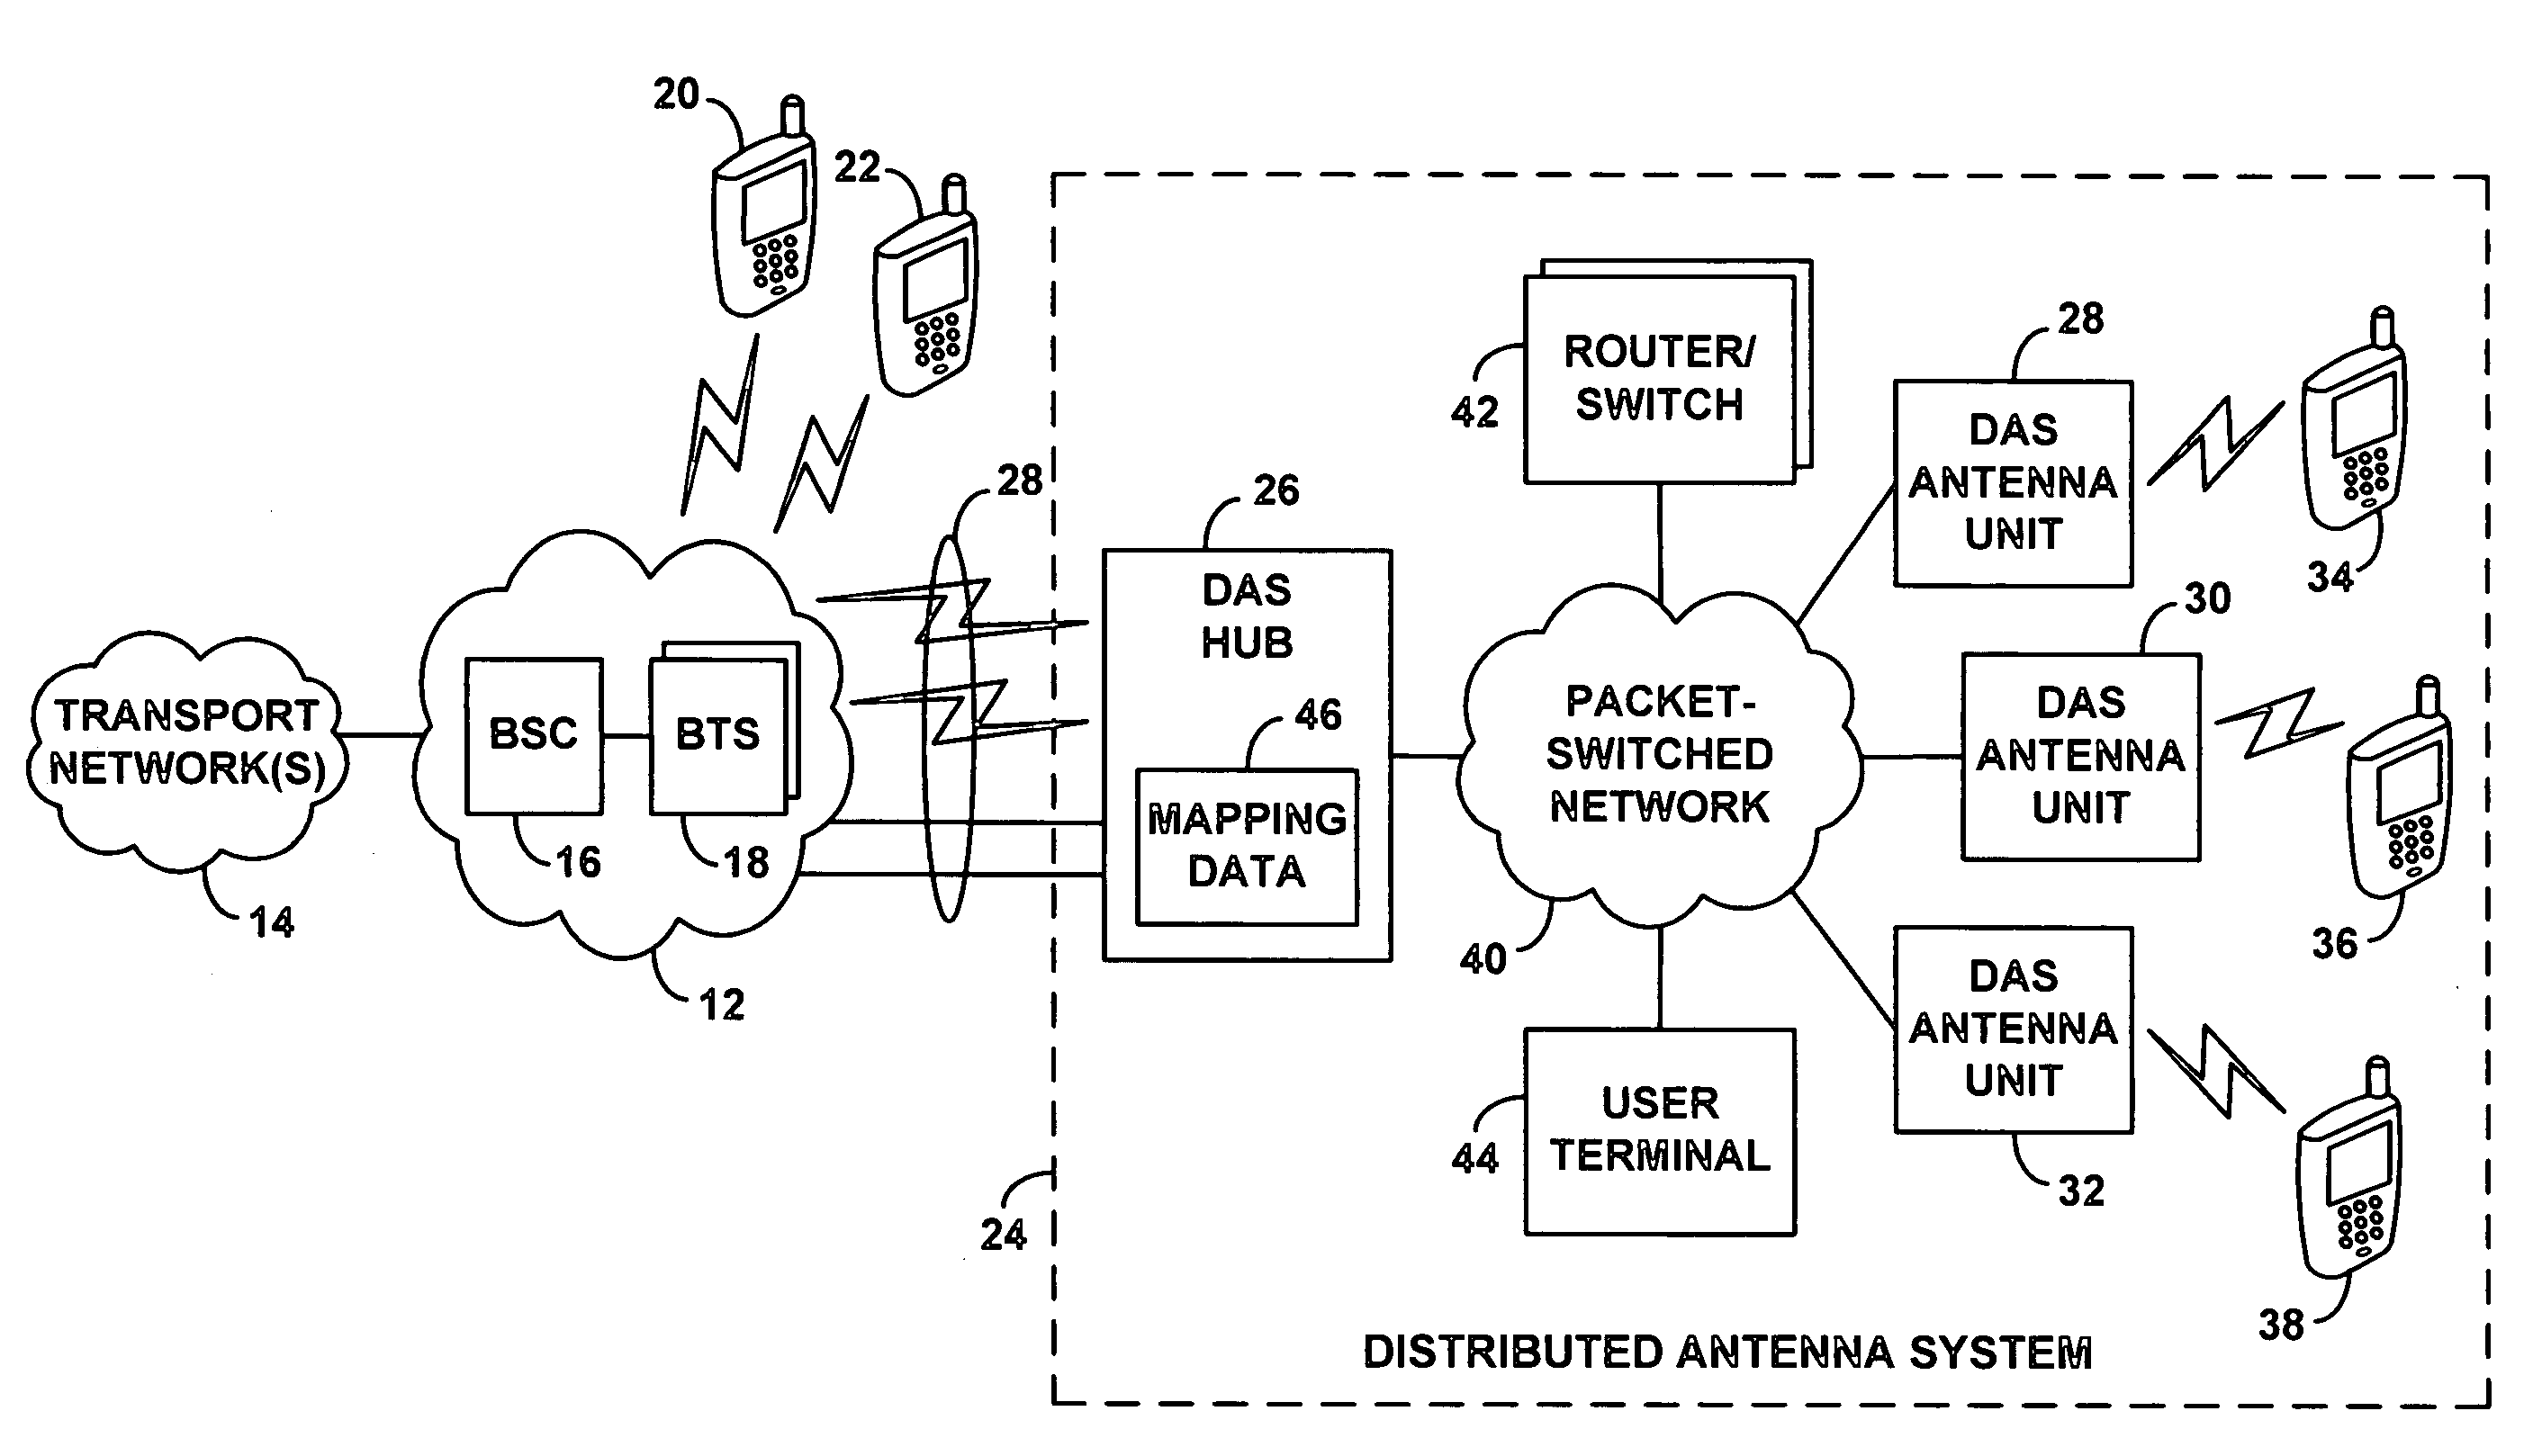 Method and system for dynamically routing between a radio access network and distributed antenna system remote antenna units